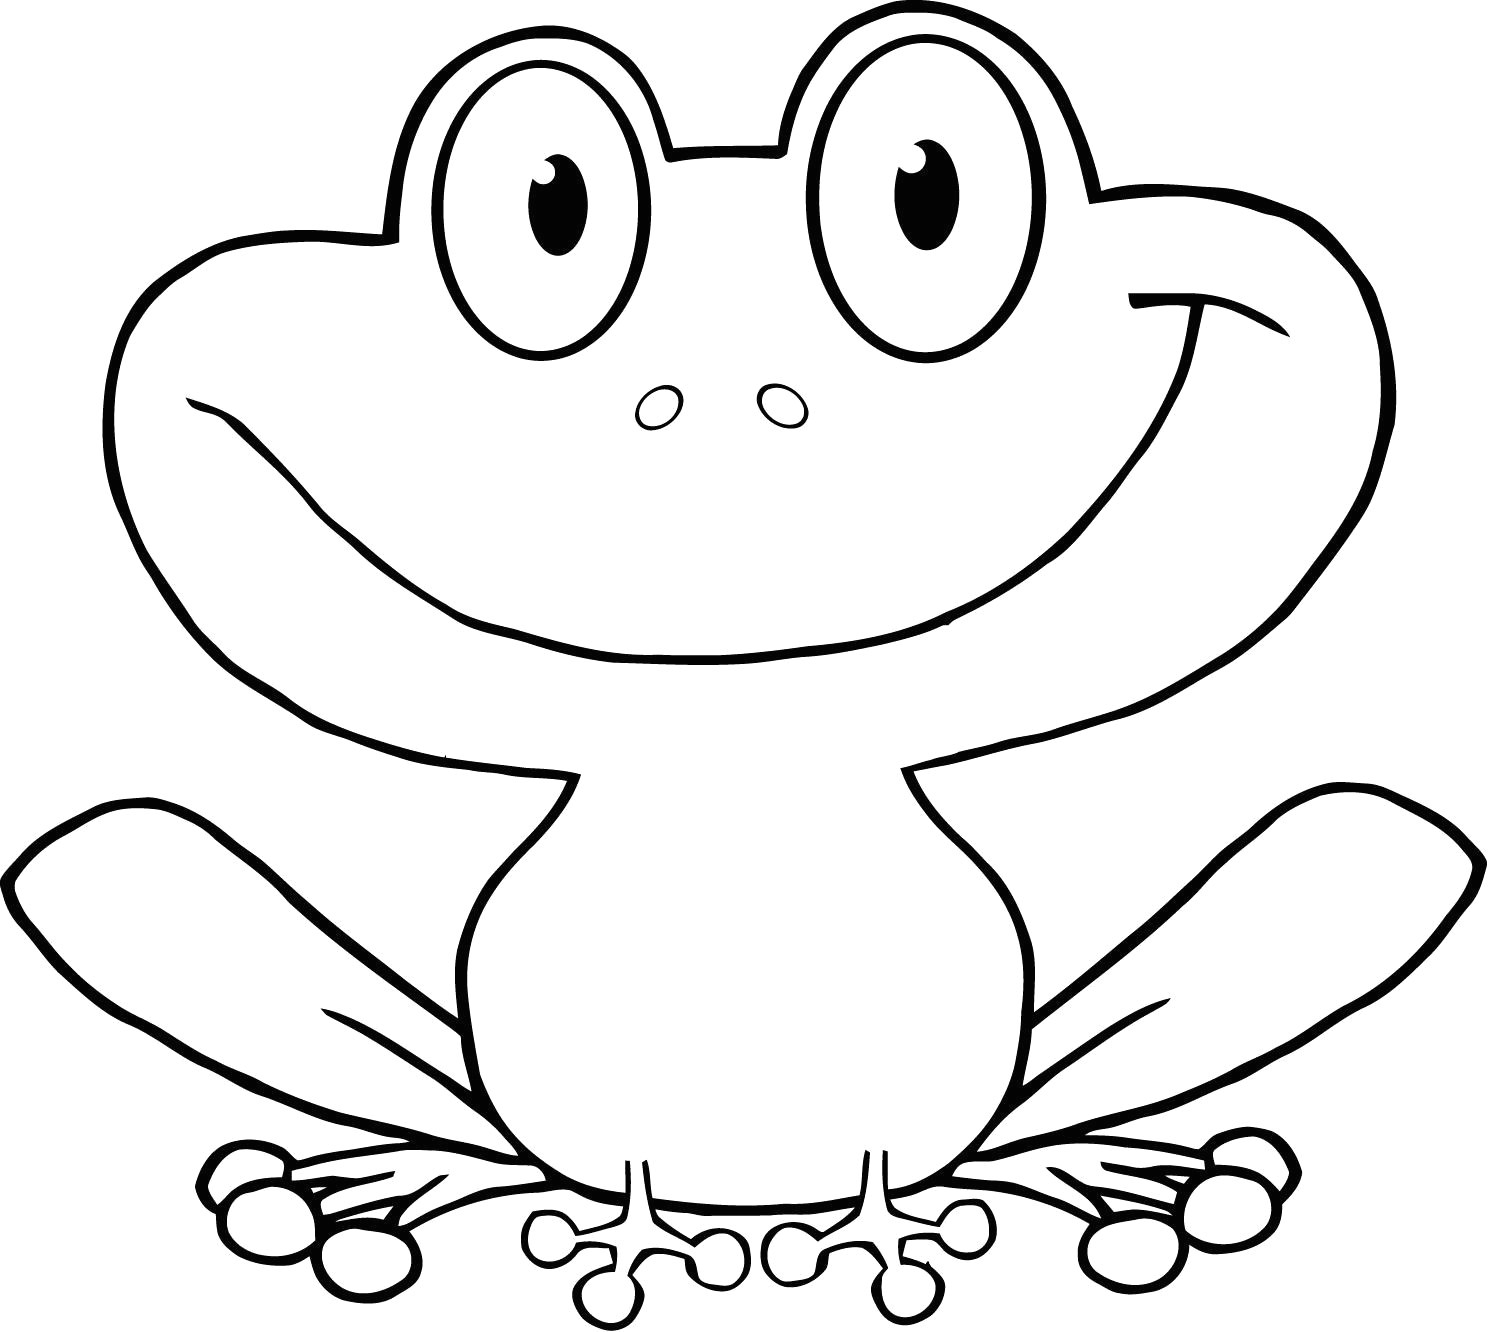 Drawing A Cartoon Frog Awesome Cartoon Frog Image Charte Graphique org